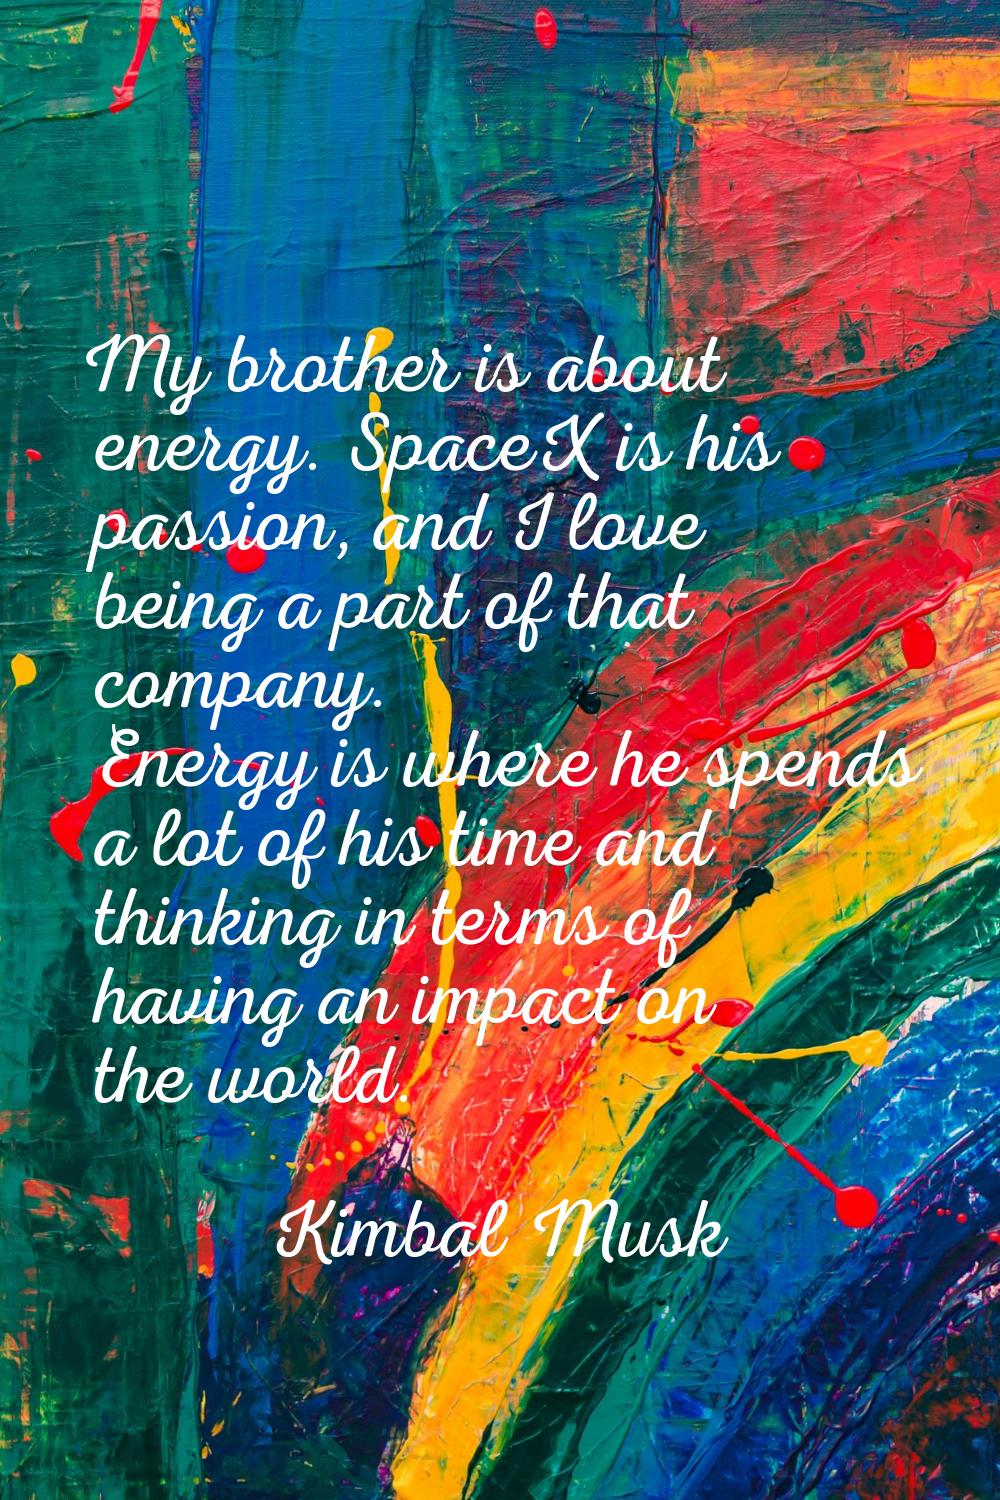 My brother is about energy. SpaceX is his passion, and I love being a part of that company. Energy 